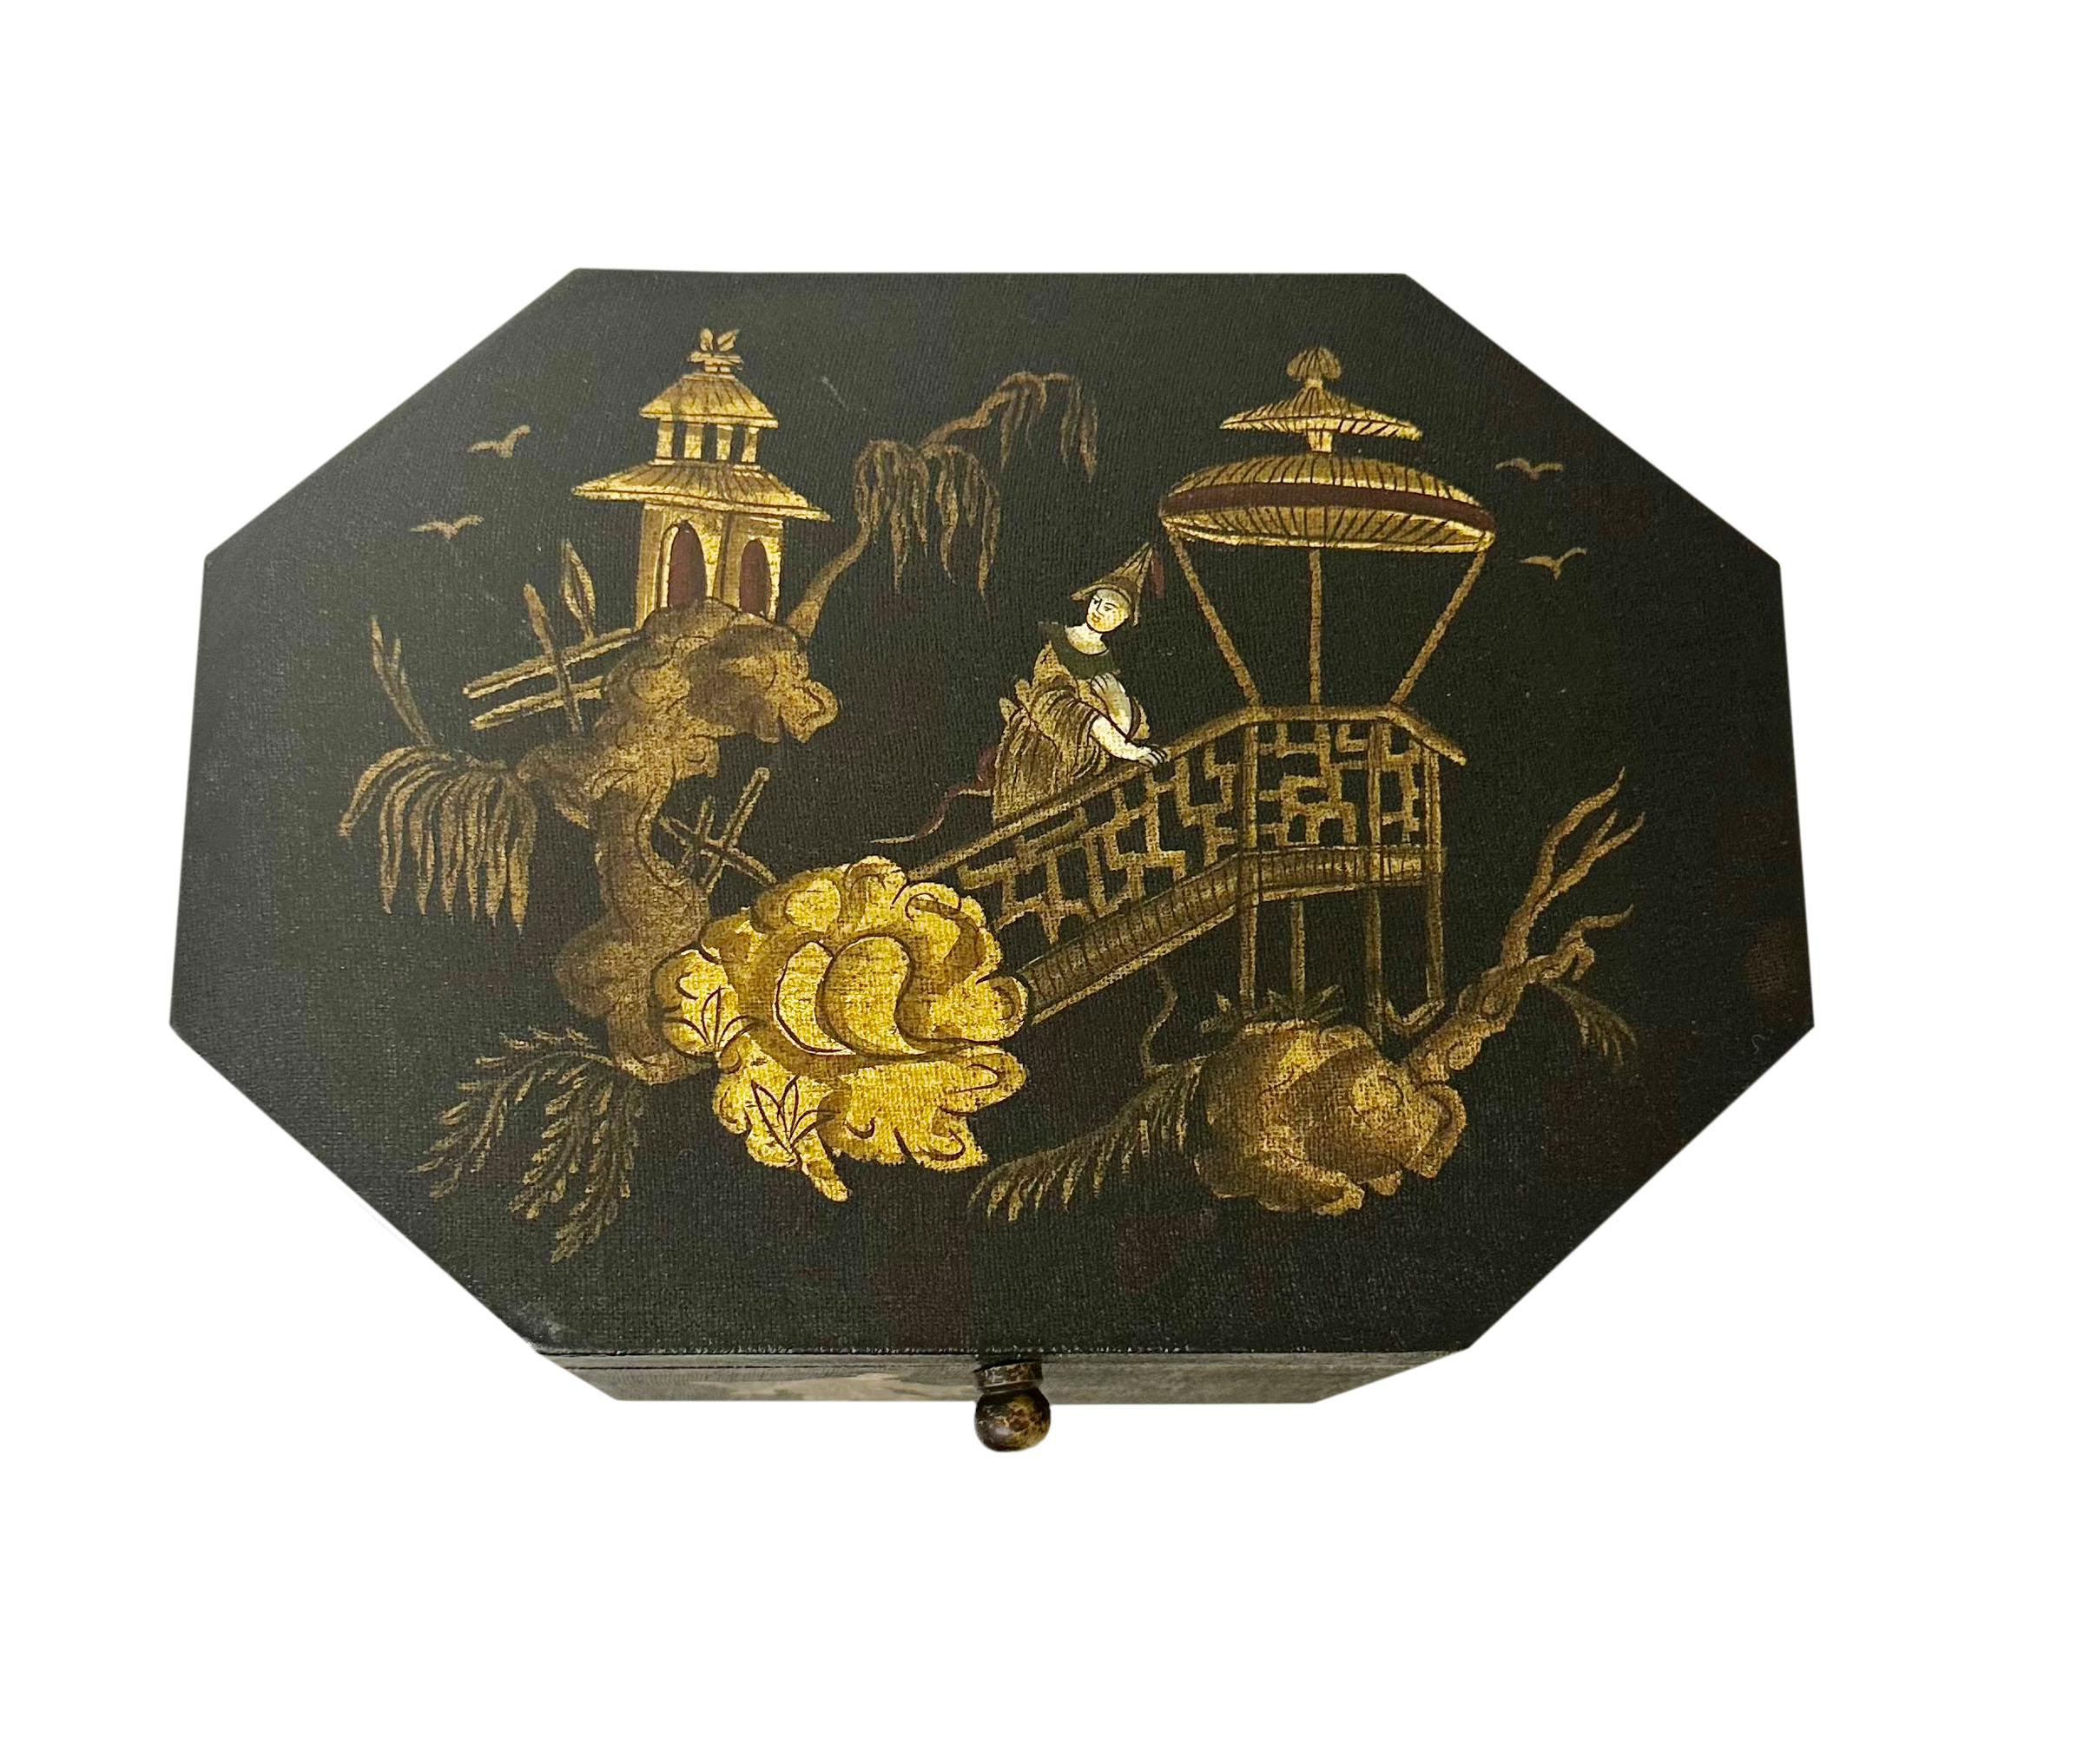 An extremely well decorated chinoiserie box with asian figures, animals and botanicals. Eight sided. From Italy, circa 1940's. The interior is four inches deep.